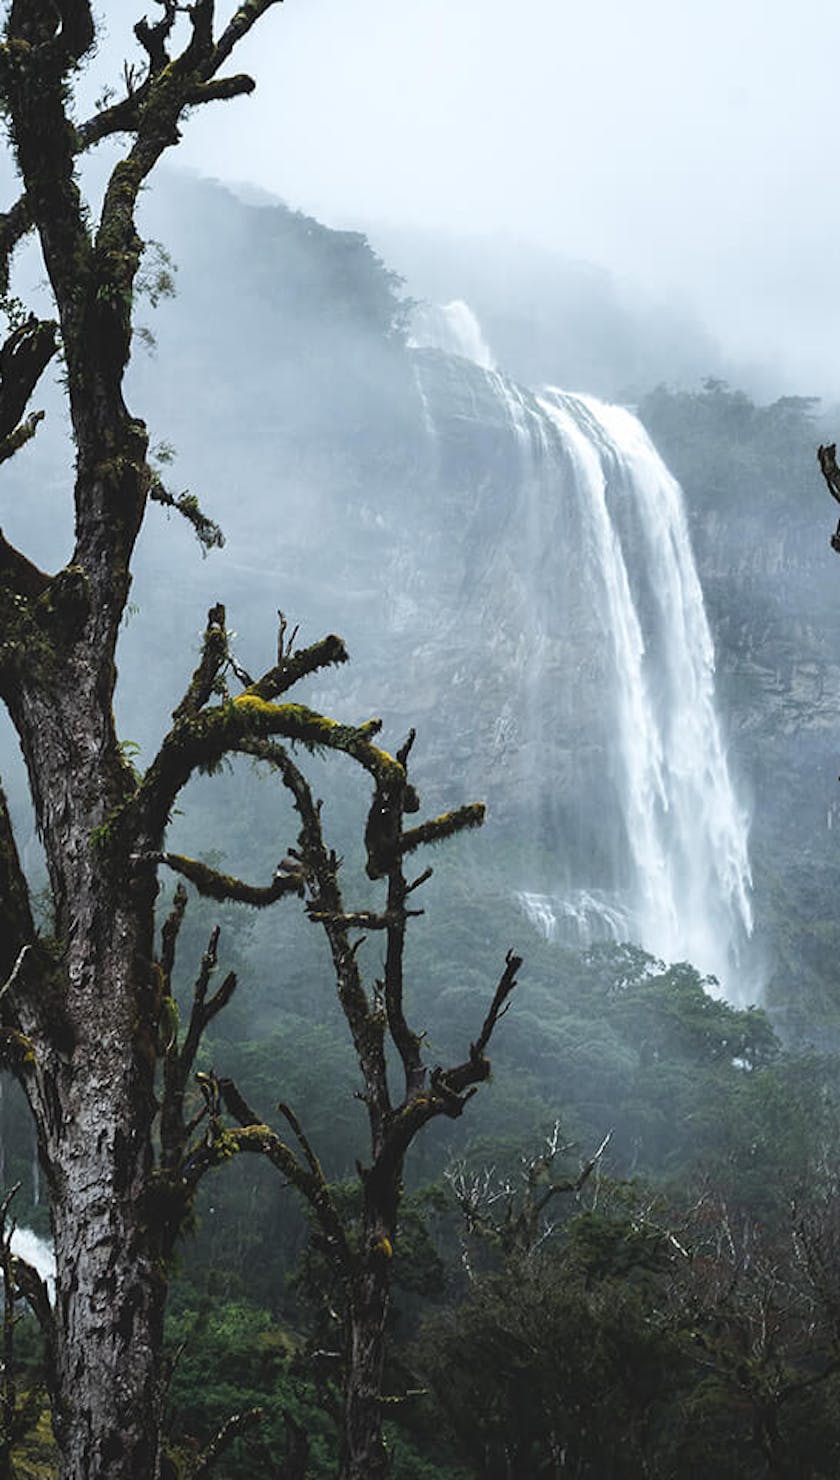 Moss covered trees and fog frame a distant waterfall in the background